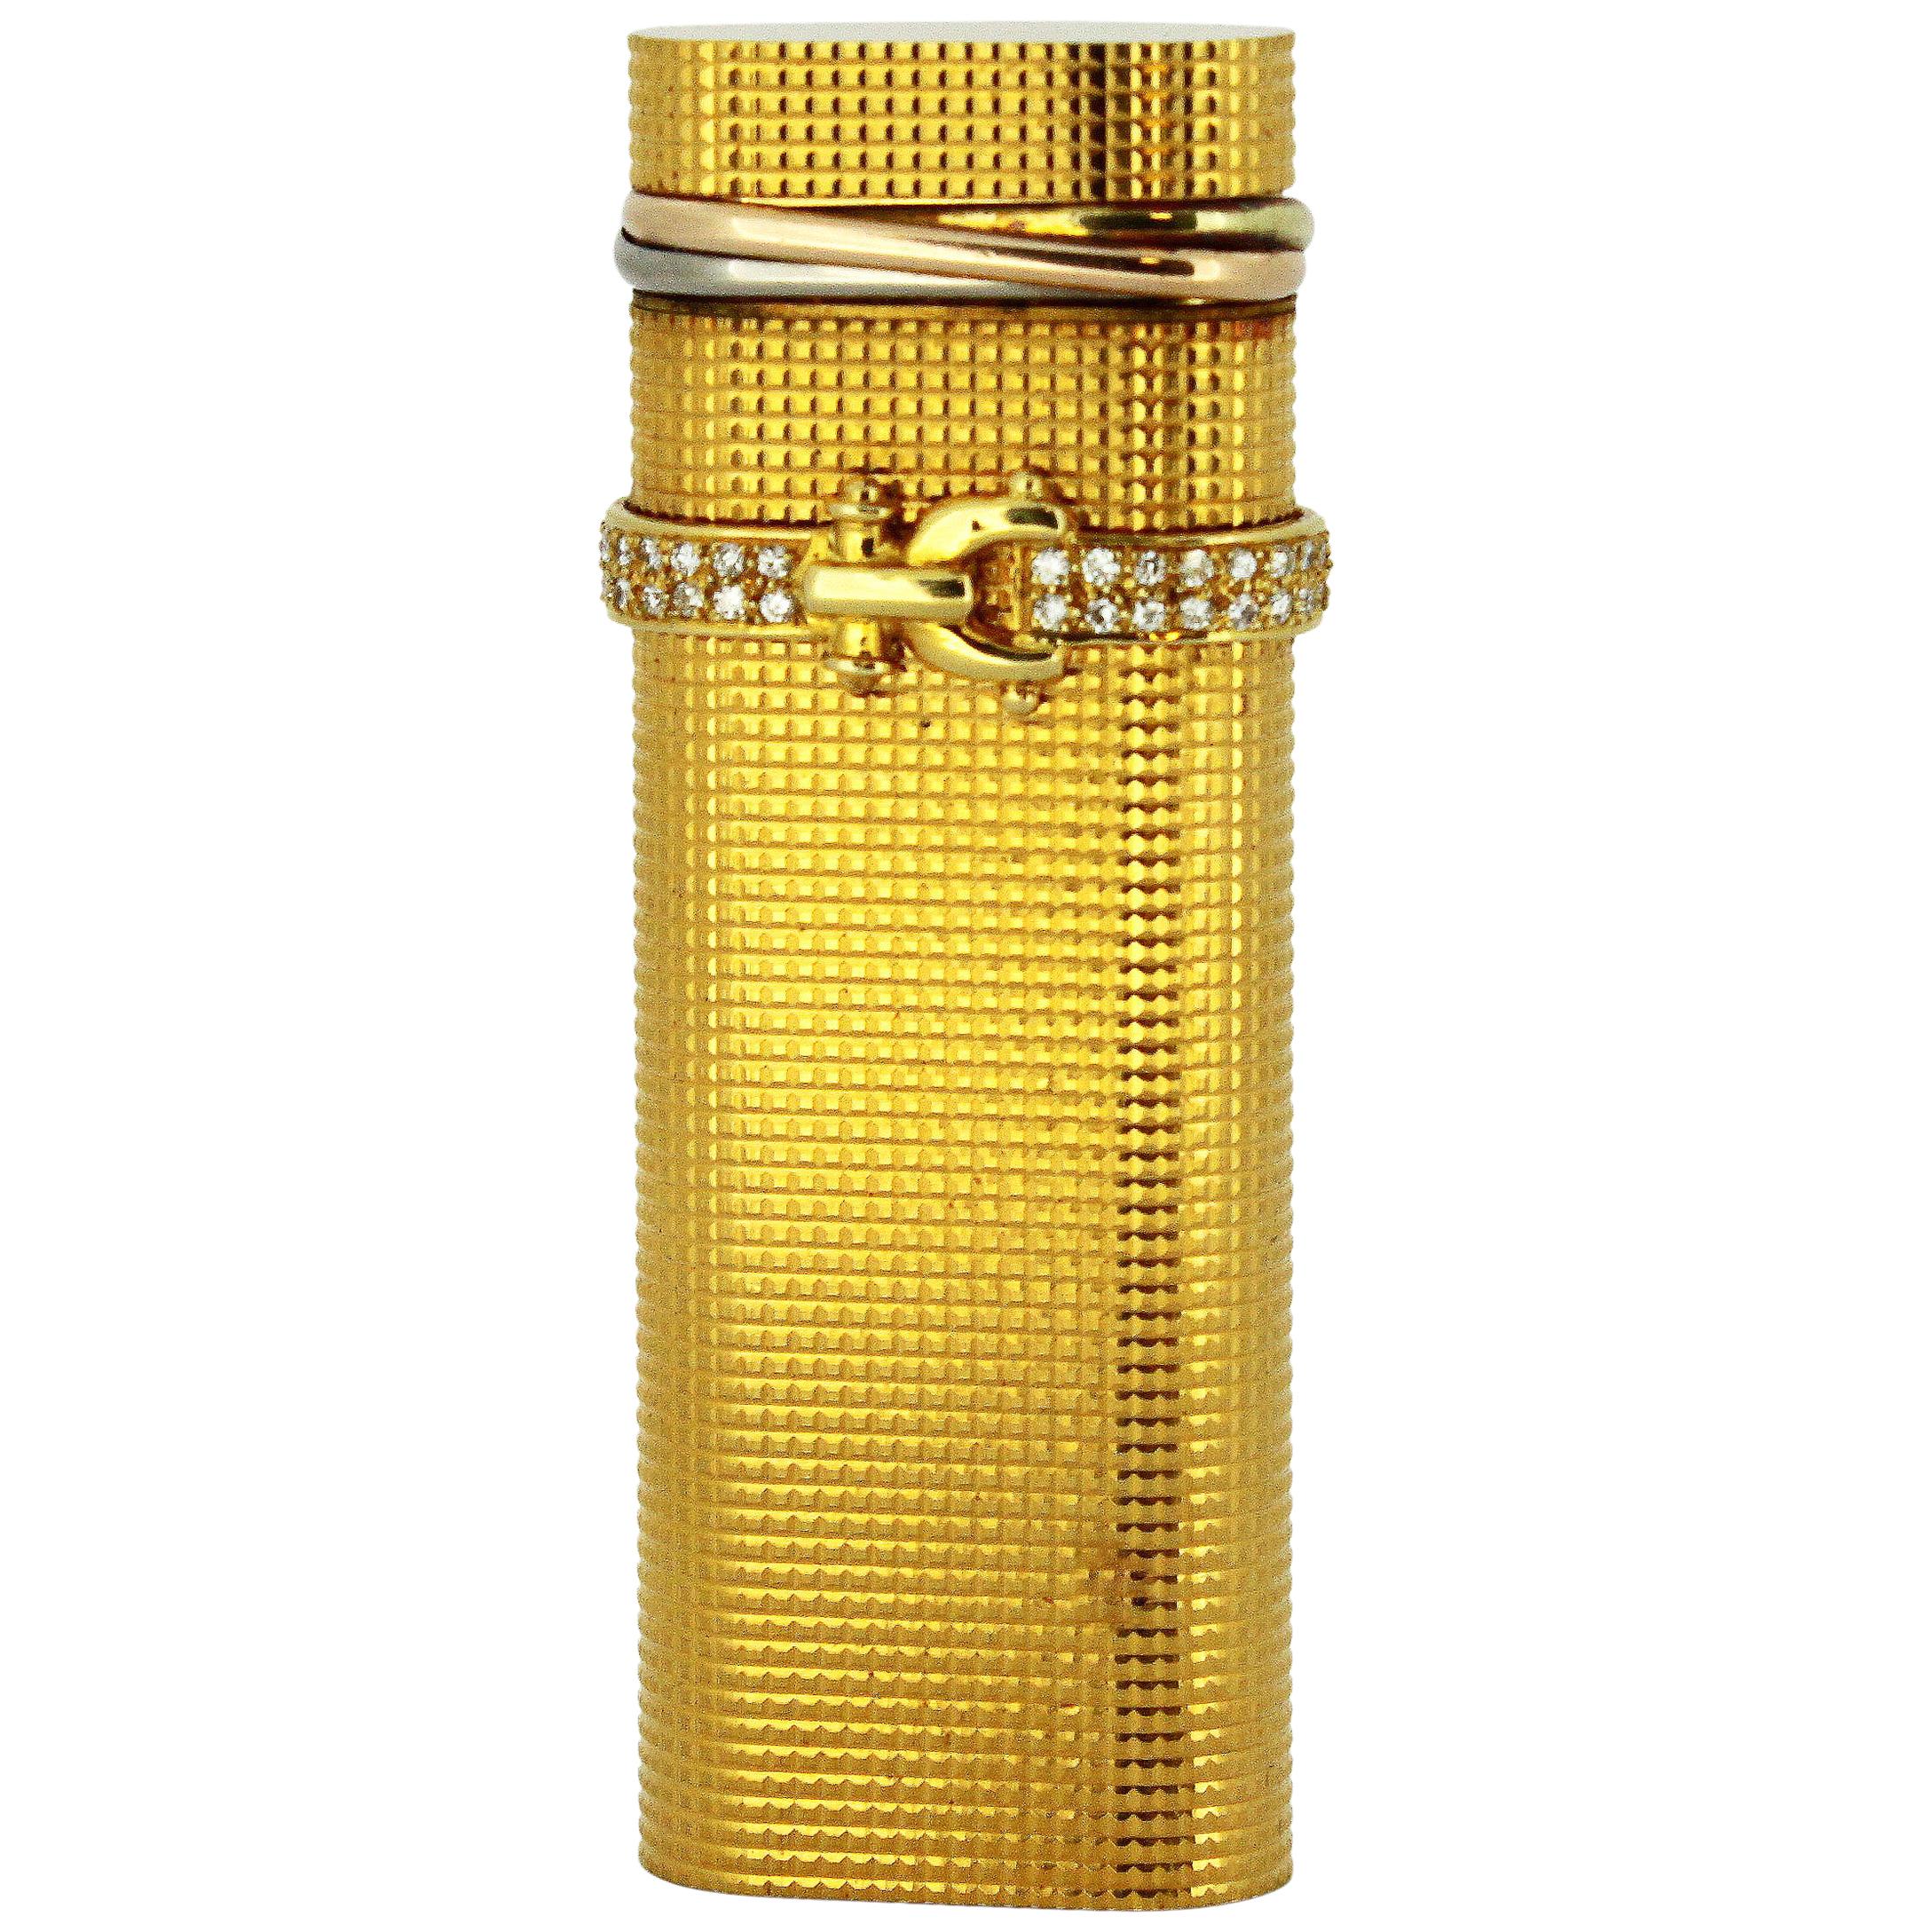 Vintage Cartier Gold Plated Lighter with Diamonds